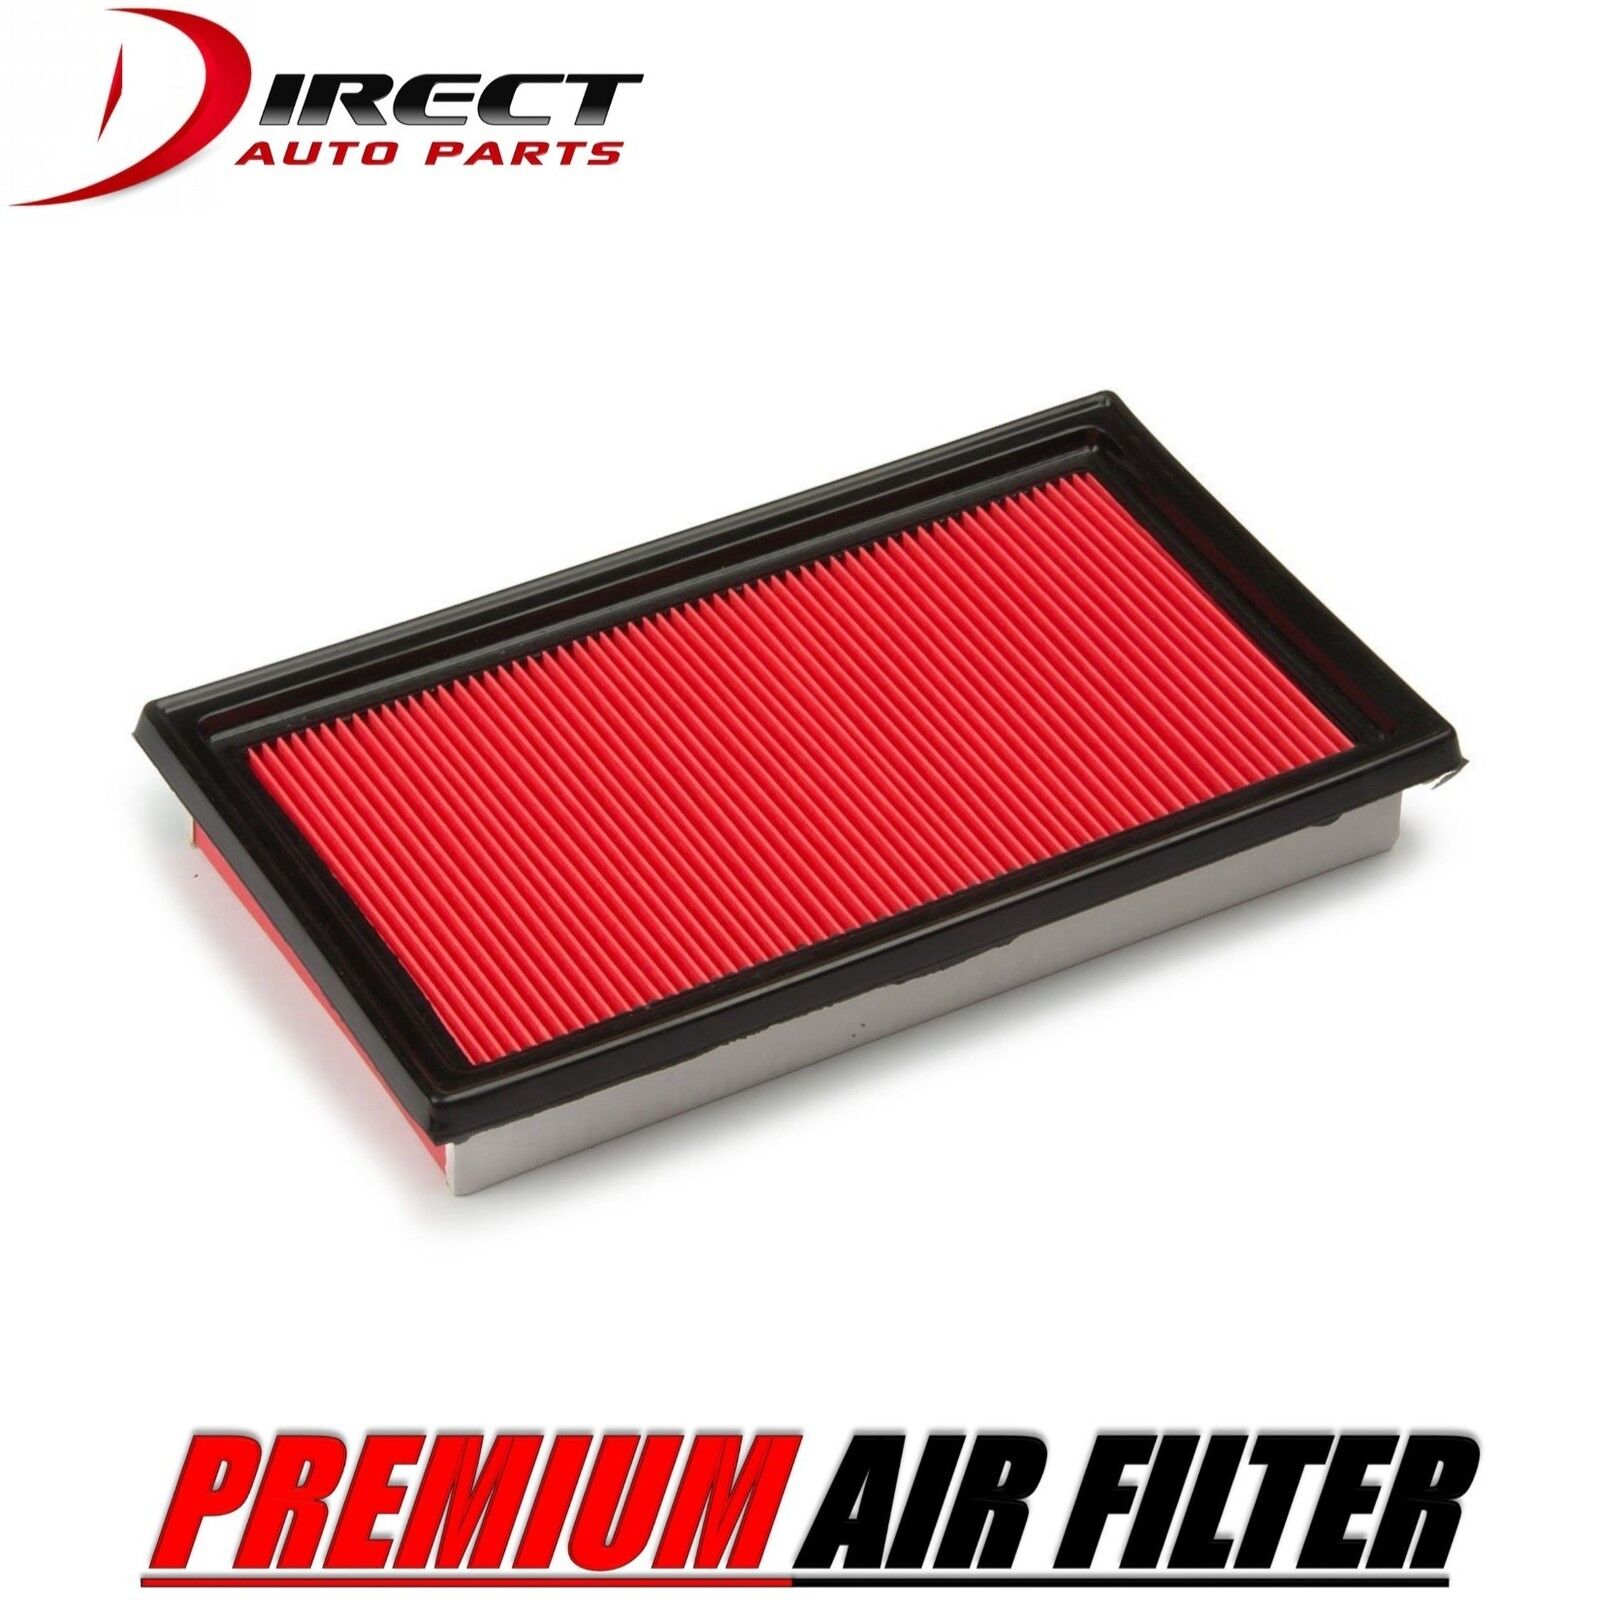 AIR FILTER FOR NISSAN FITS MAXIMA 3.5L ENGINE 2002 - 2014